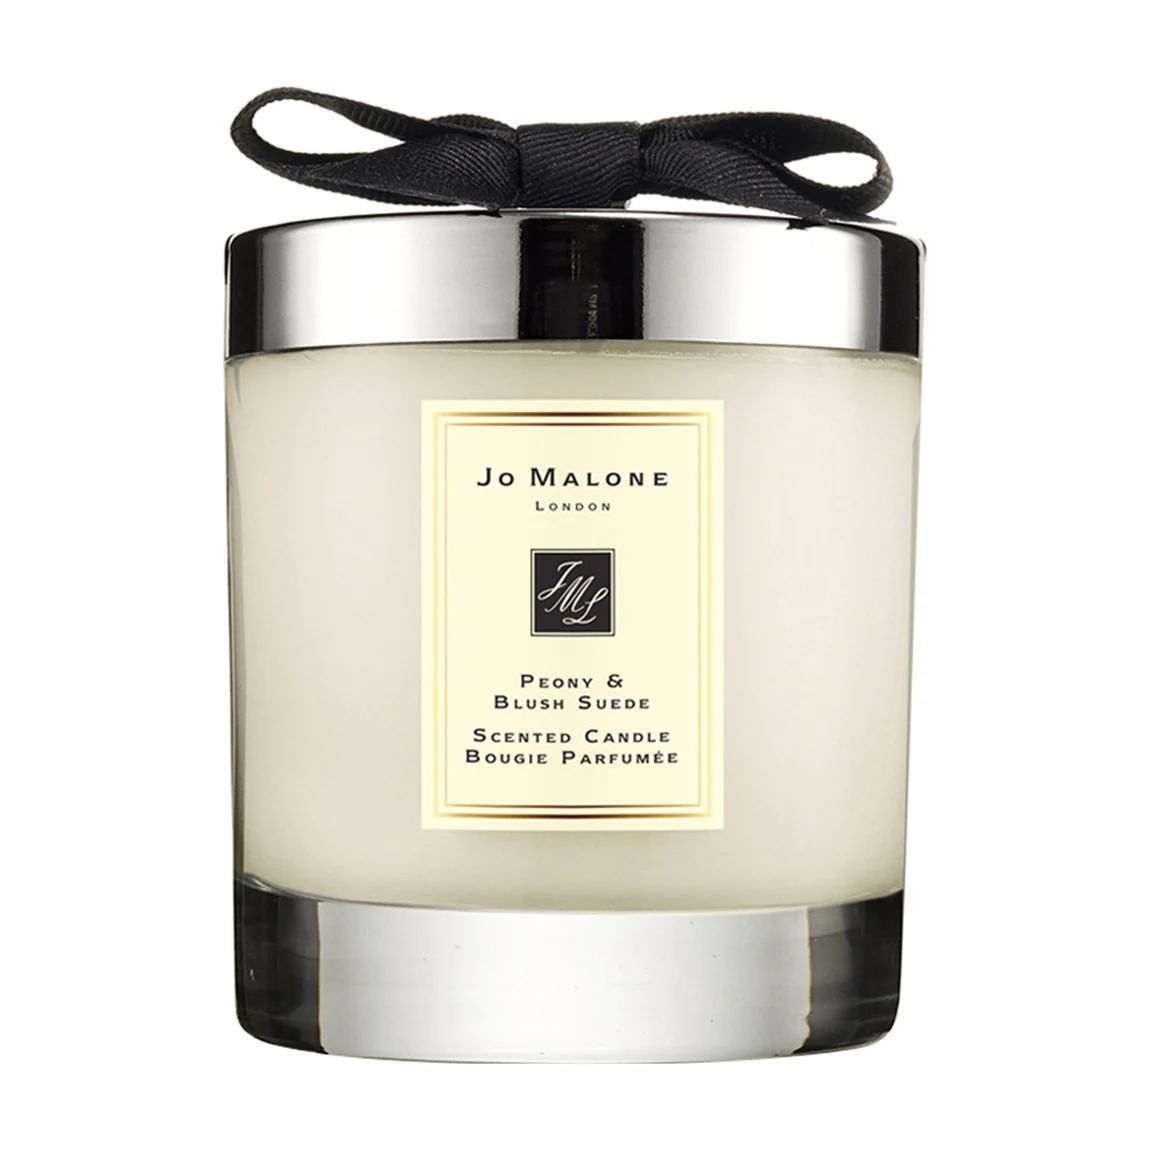 Peony and Blush Suede Home Candle | Bluemercury, Inc.